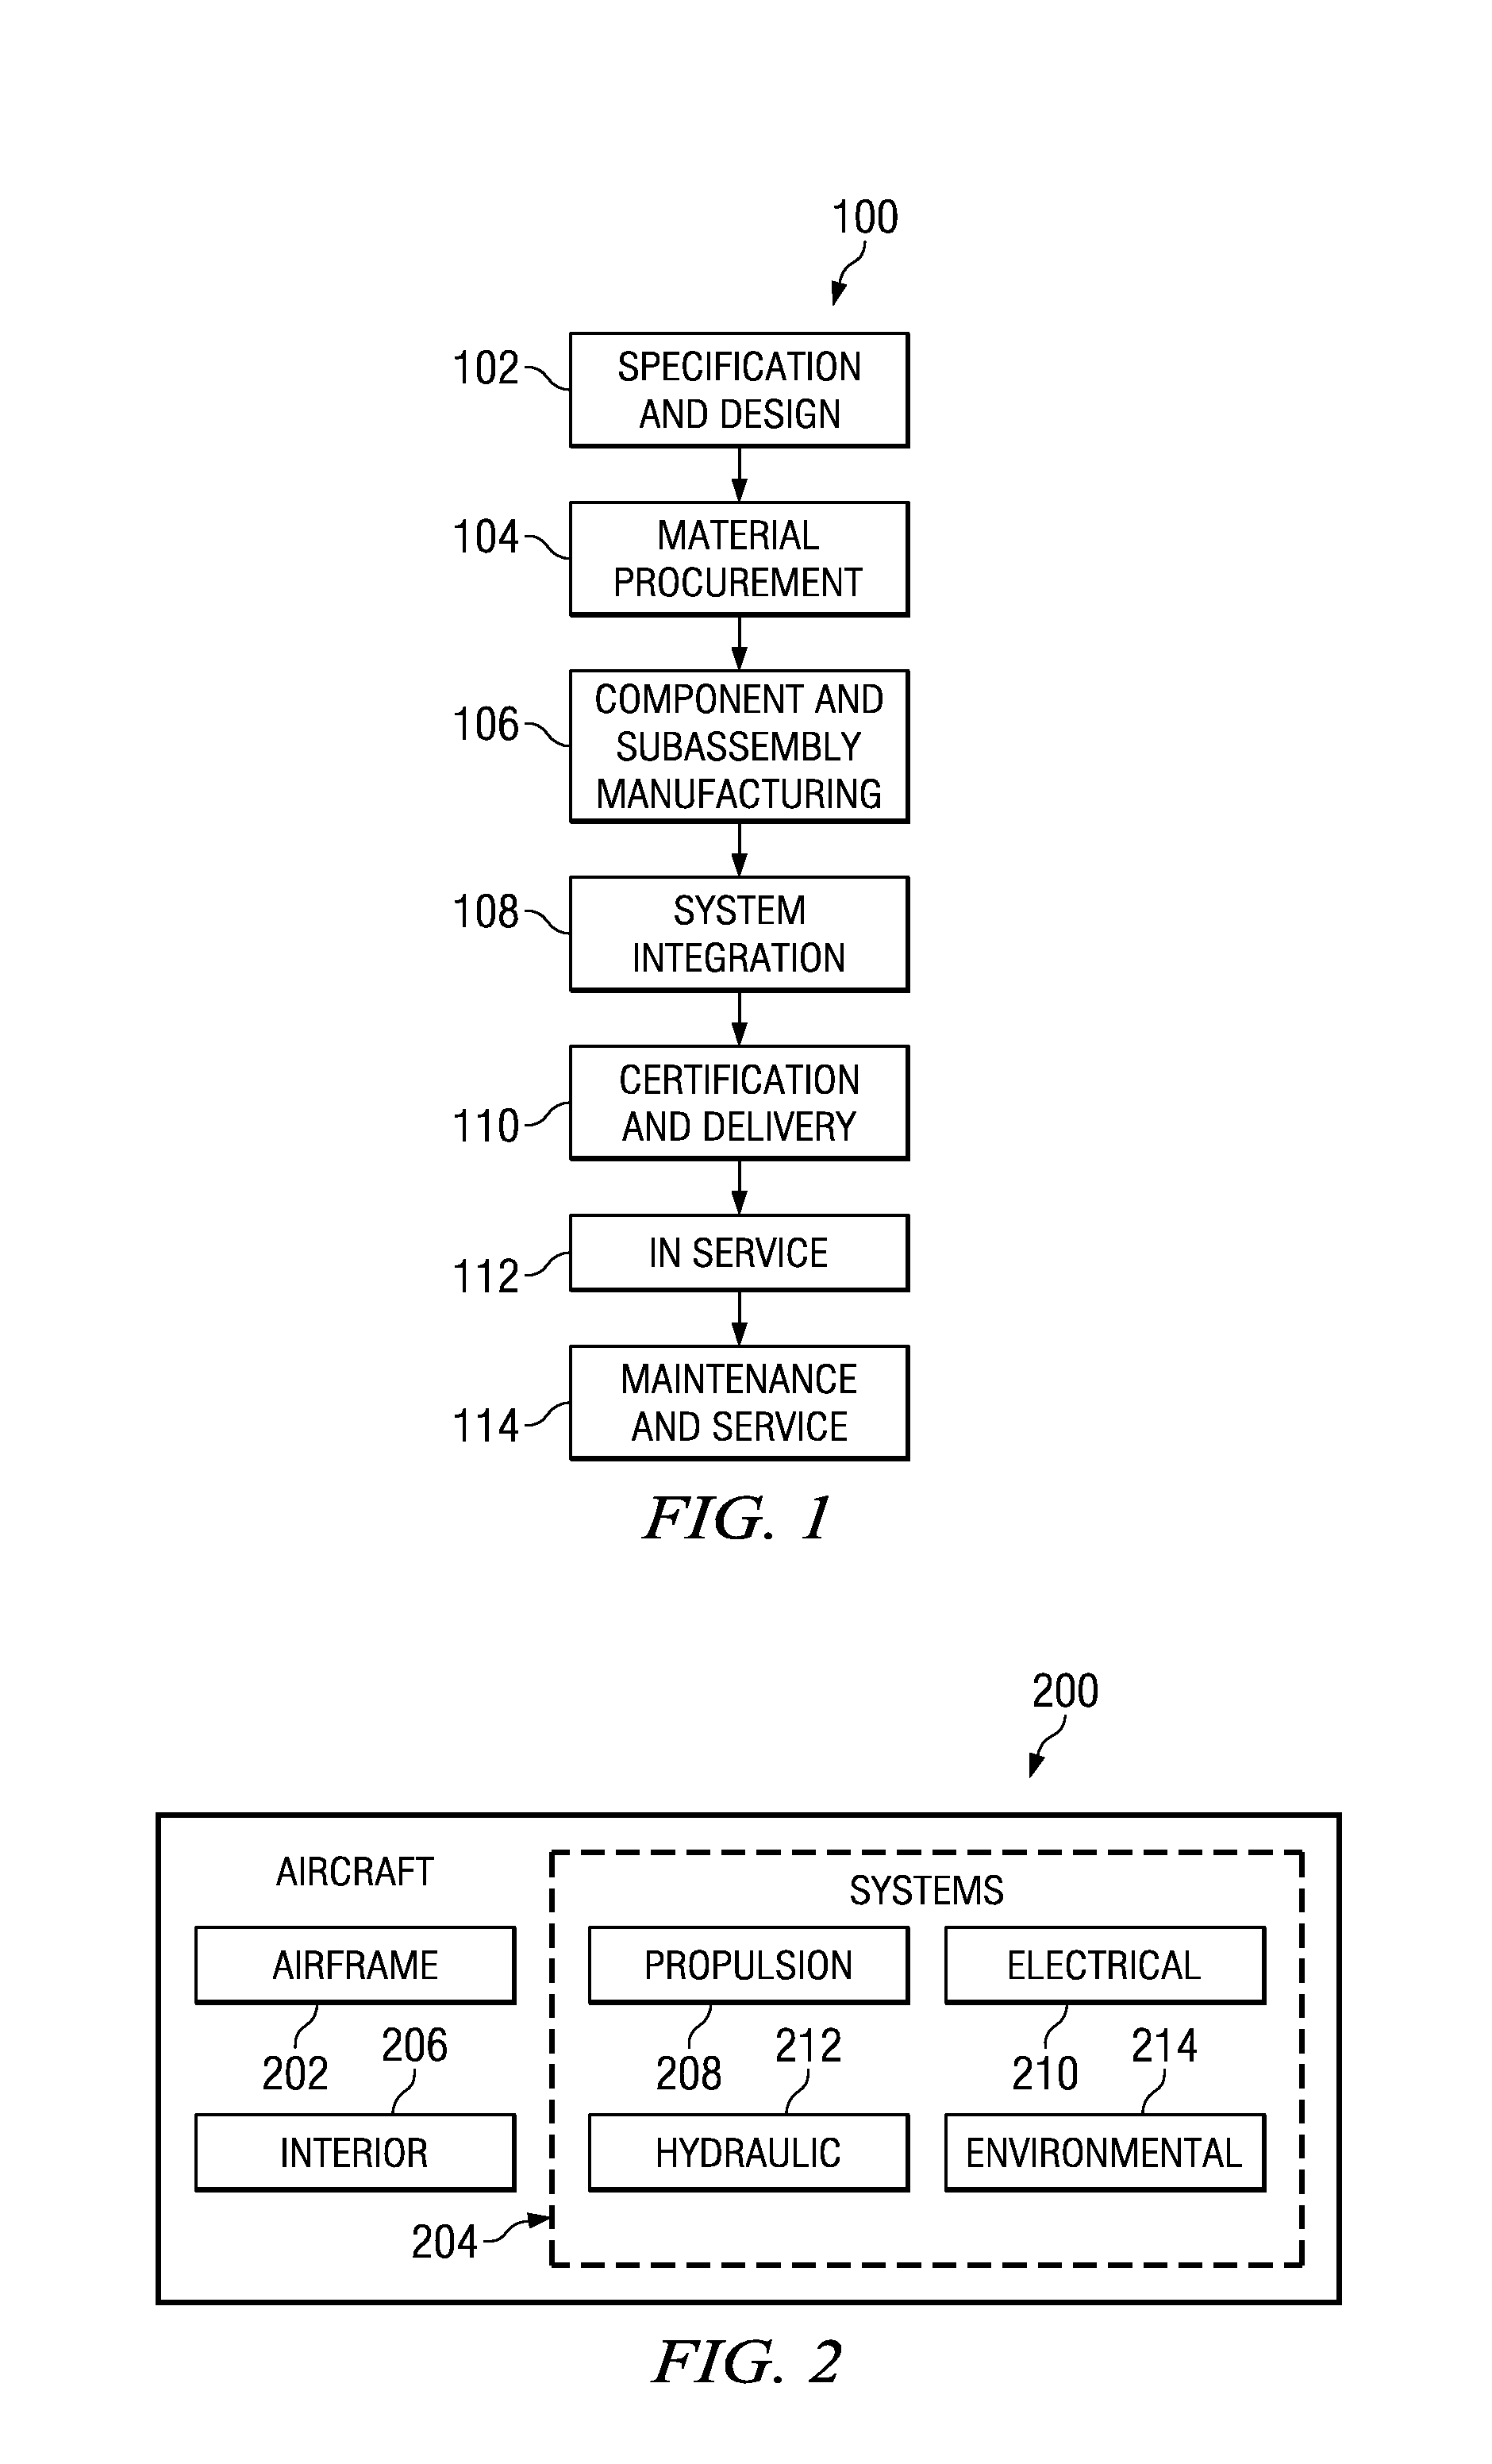 Method and apparatus for generation of datamatrix barcodes utilizing numerical control drilling patterns